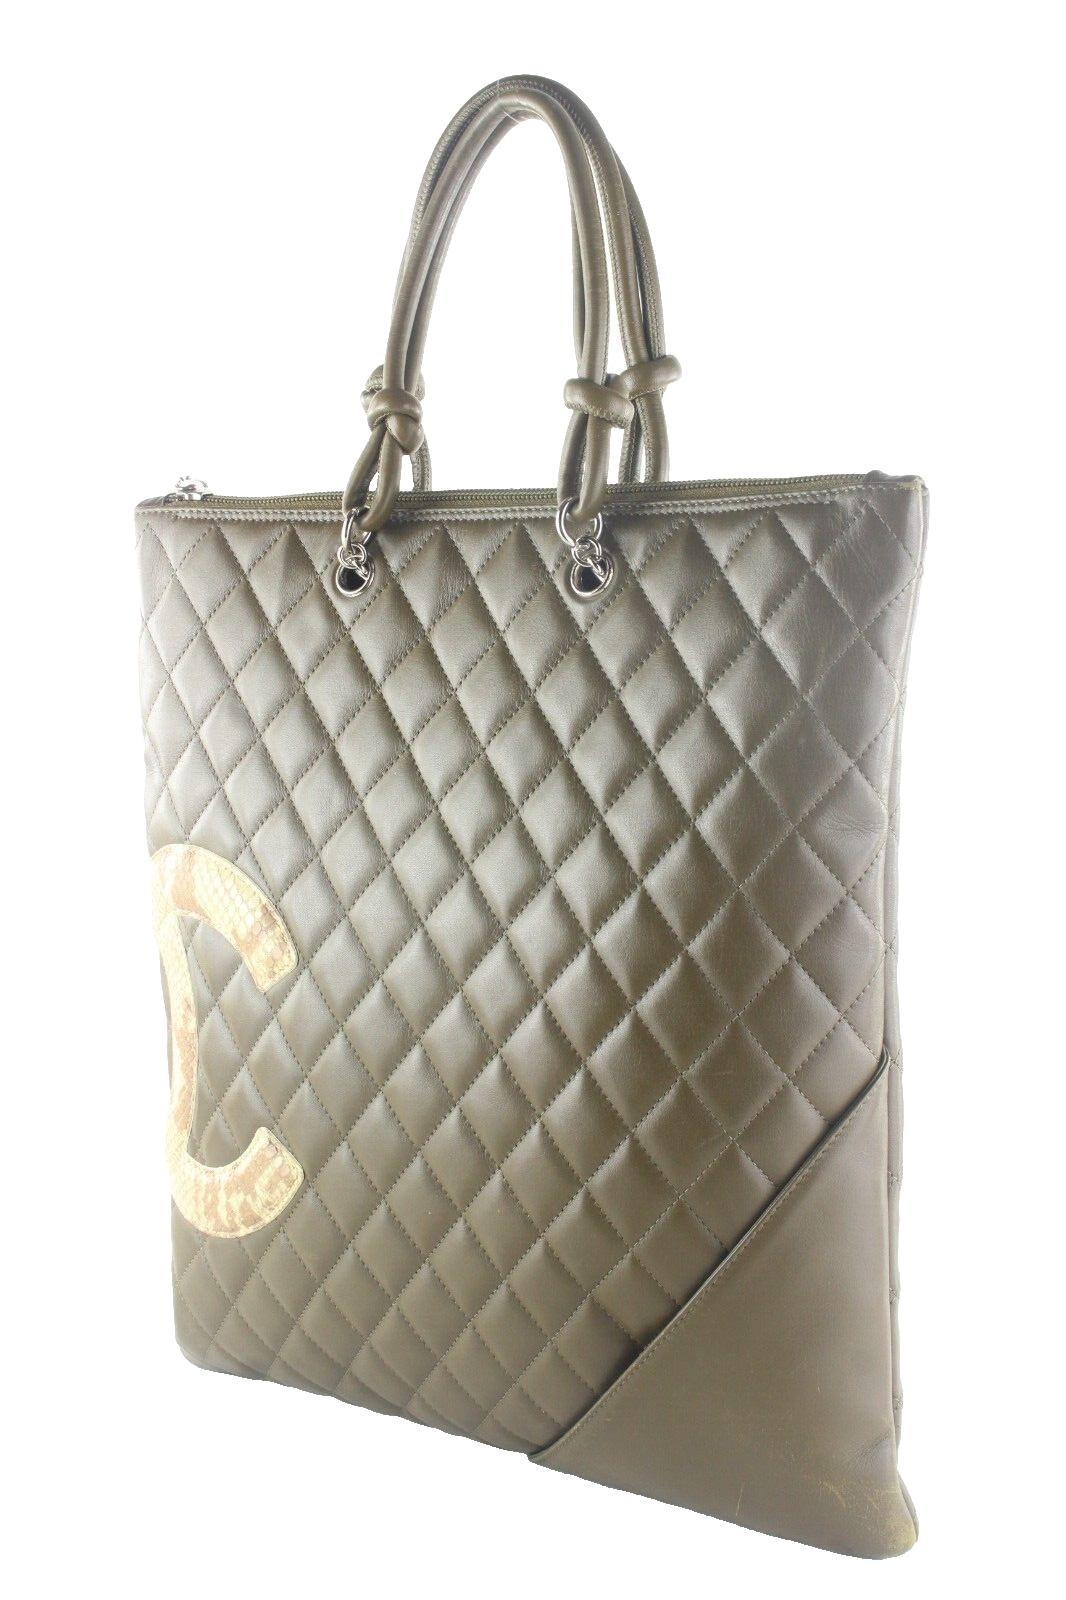 Chanel Khaki Olive Leather Quilted Cambon Tote 3CAS1023K For Sale 7